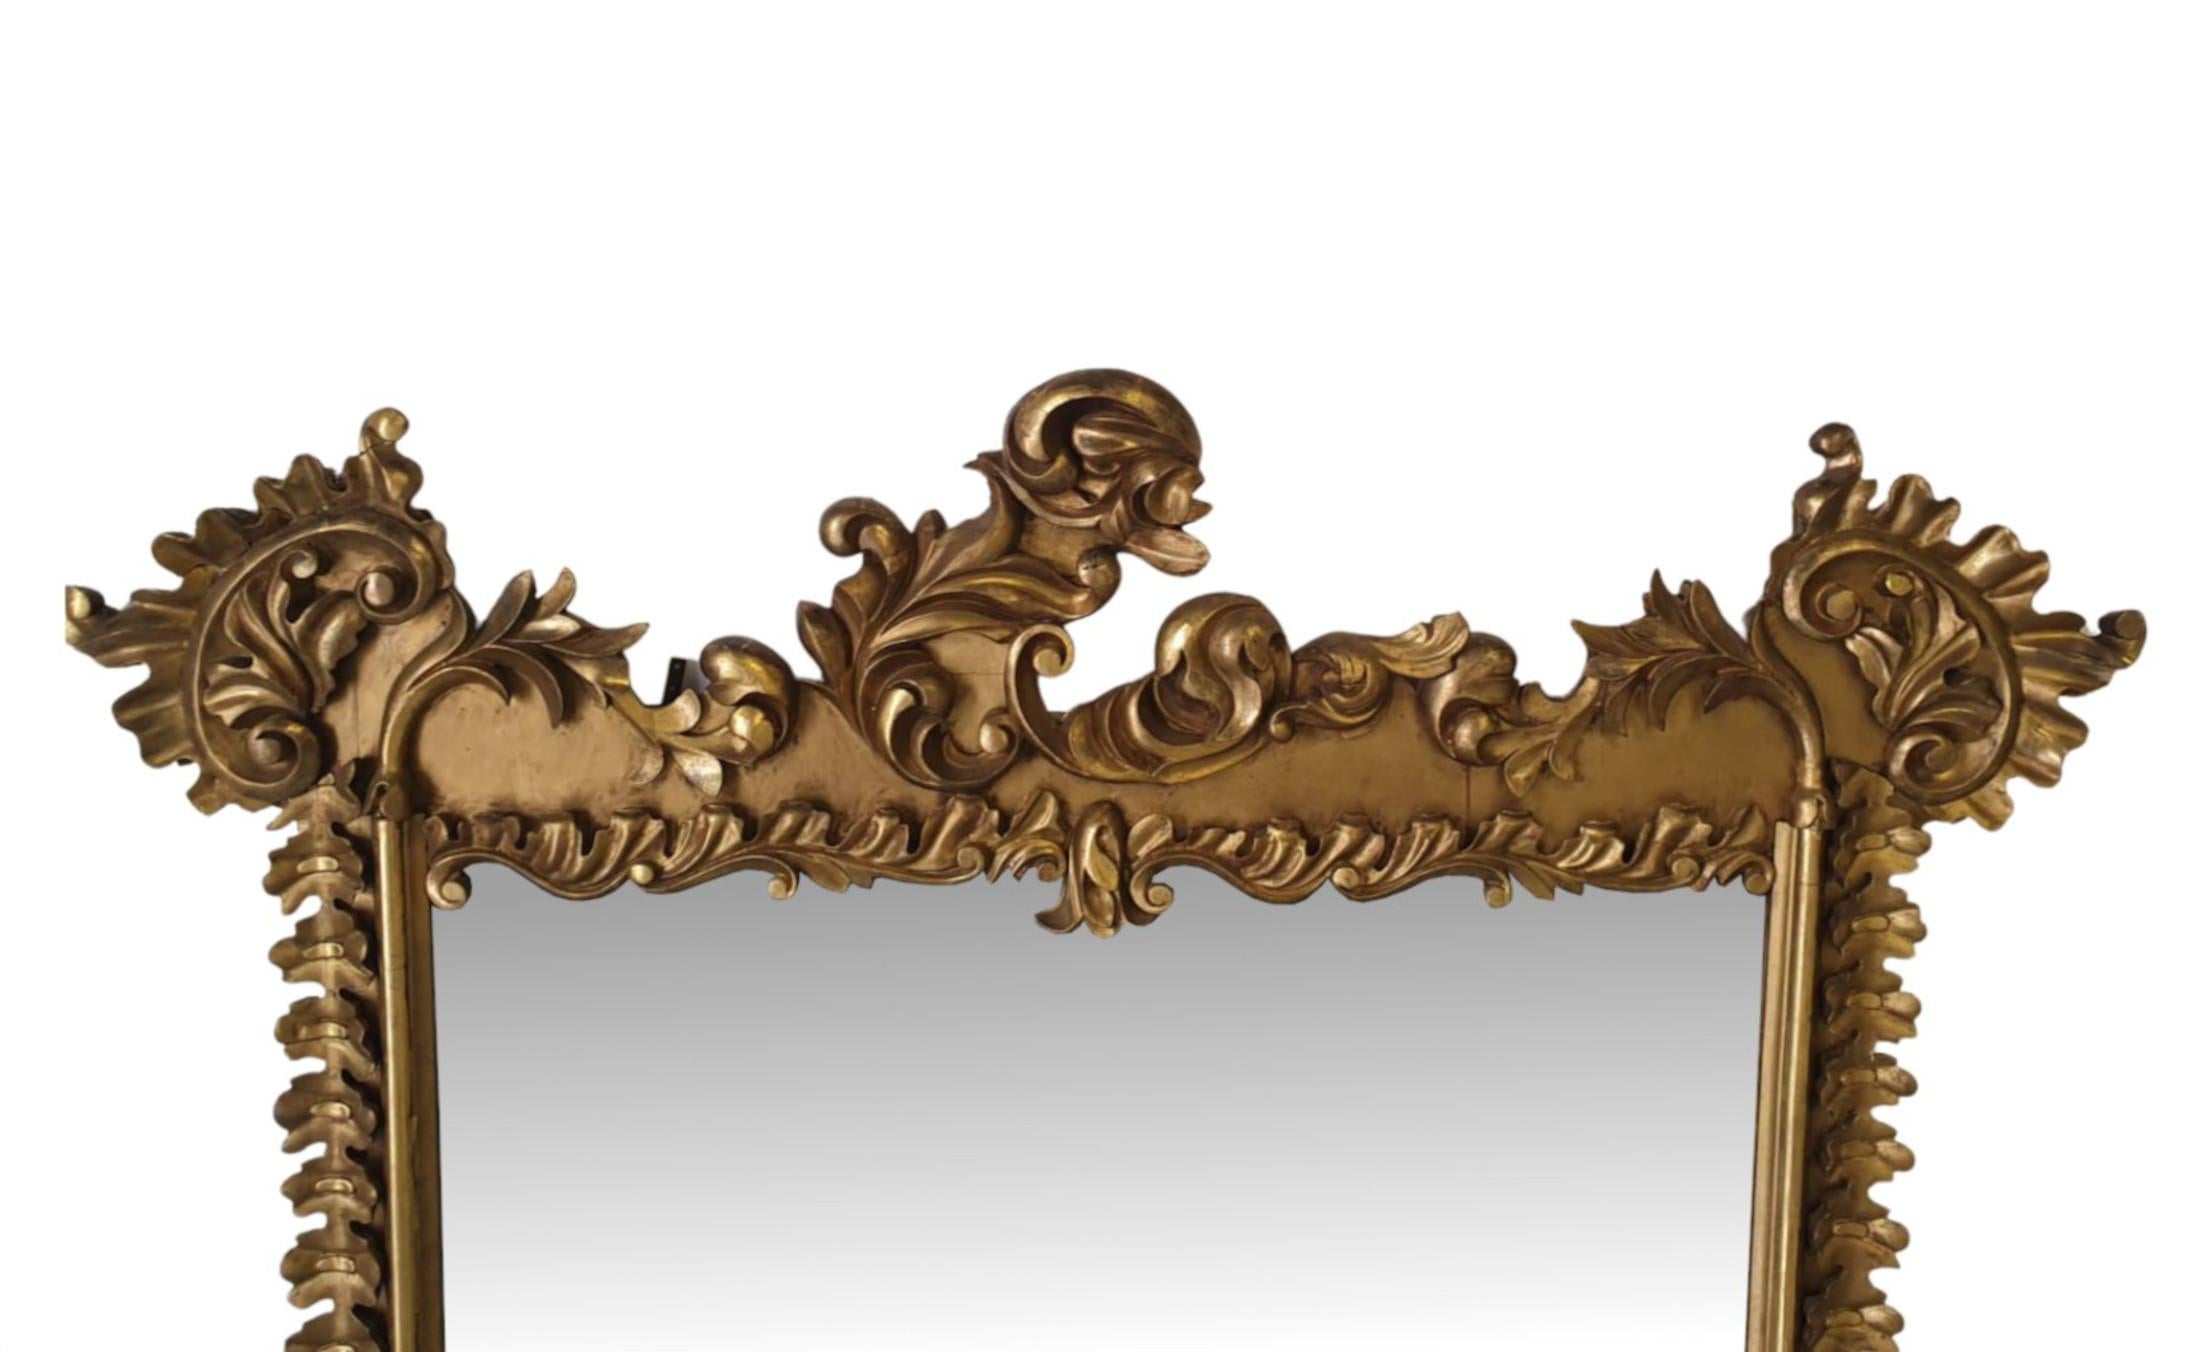 A very fine early 19th century Irish William IV giltwood overmantle mirror. The mirror glass plate of rectangular form is set within an elegantly shaped and moulded giltwood frame, adorned throughout with scrolling foliate, surmounted with stunning